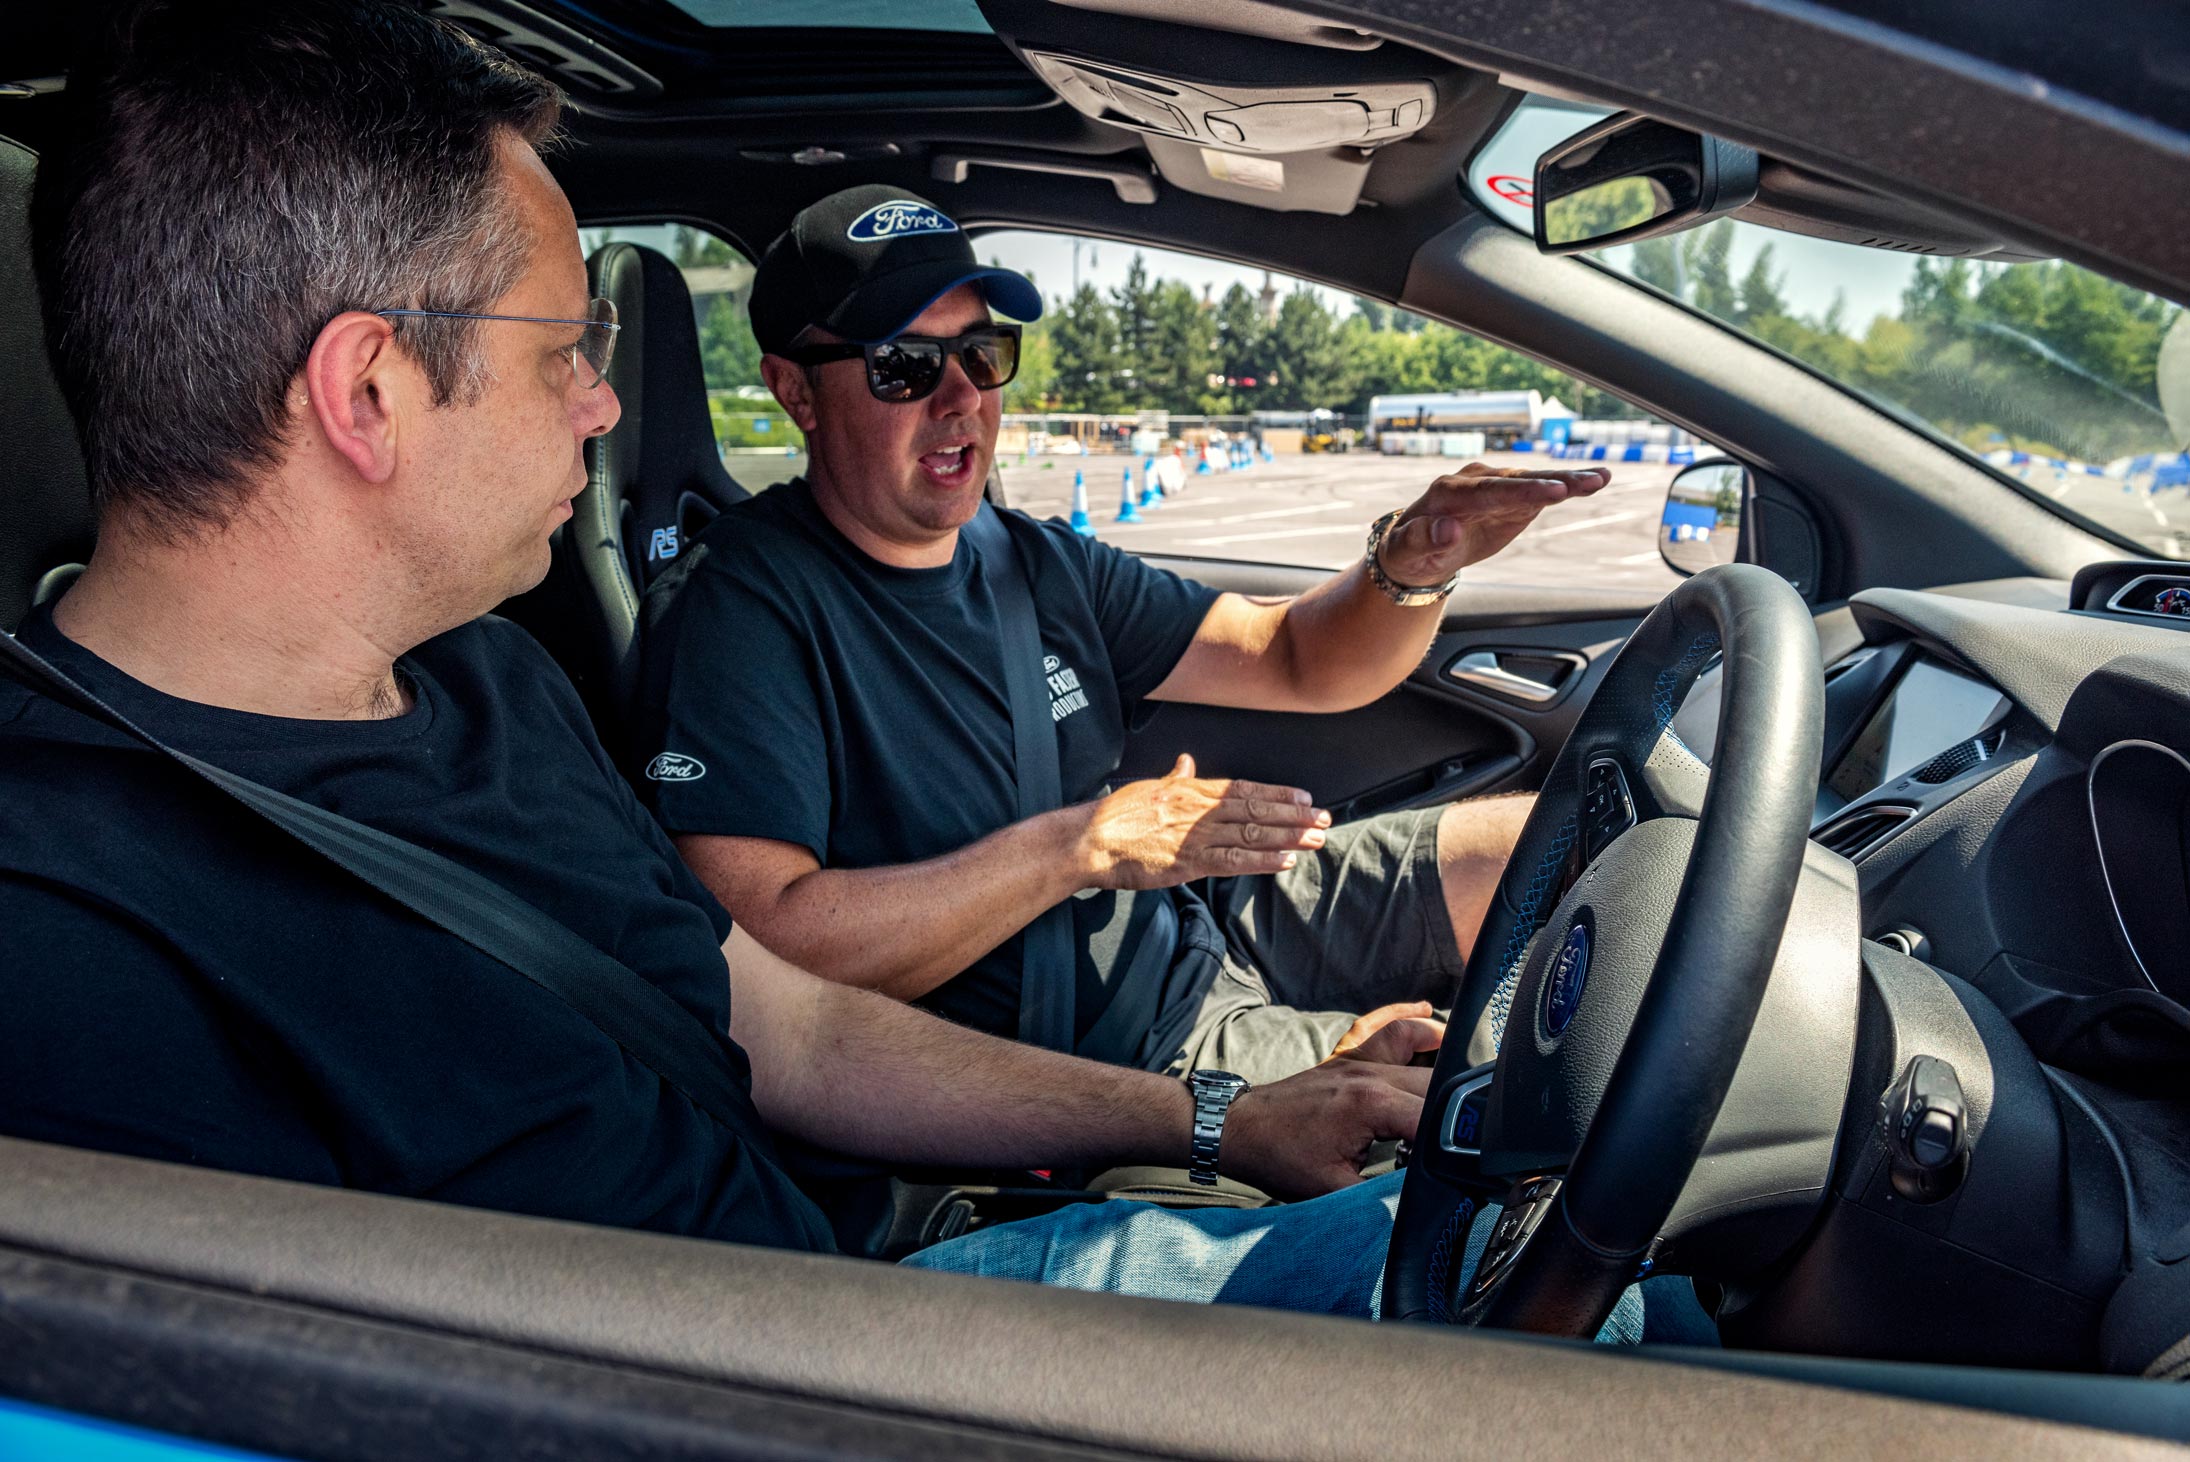 An adrenaline-fueled moment captured by Wright Content, featuring a professional driver instructing a journalist on how to perform donuts in a sports car. Inside the car, the journalist receives expert guidance as they prepare to unleash the thrill of drifting. Wright Content specializes in dynamic motorsport event photography.